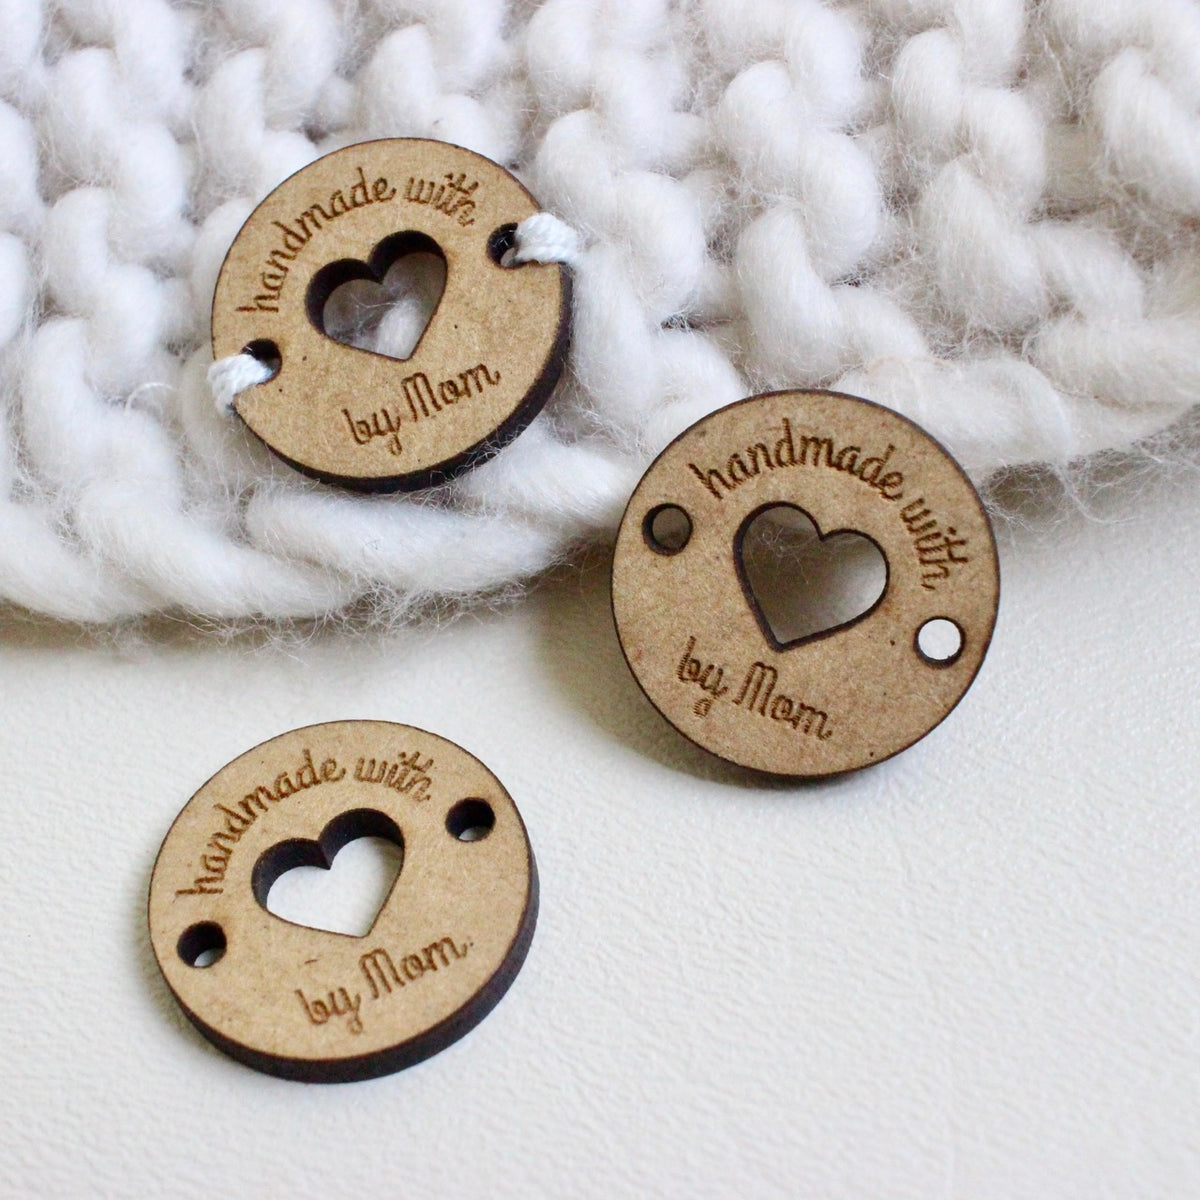 100pcs Handmade Tag Buttons Handmade Tag Label Wood Handmade Button  Clothing Labels For Kids Handmade Tags For Knitting Handmade Wooden Buttons  Accessories,Coffee Brown